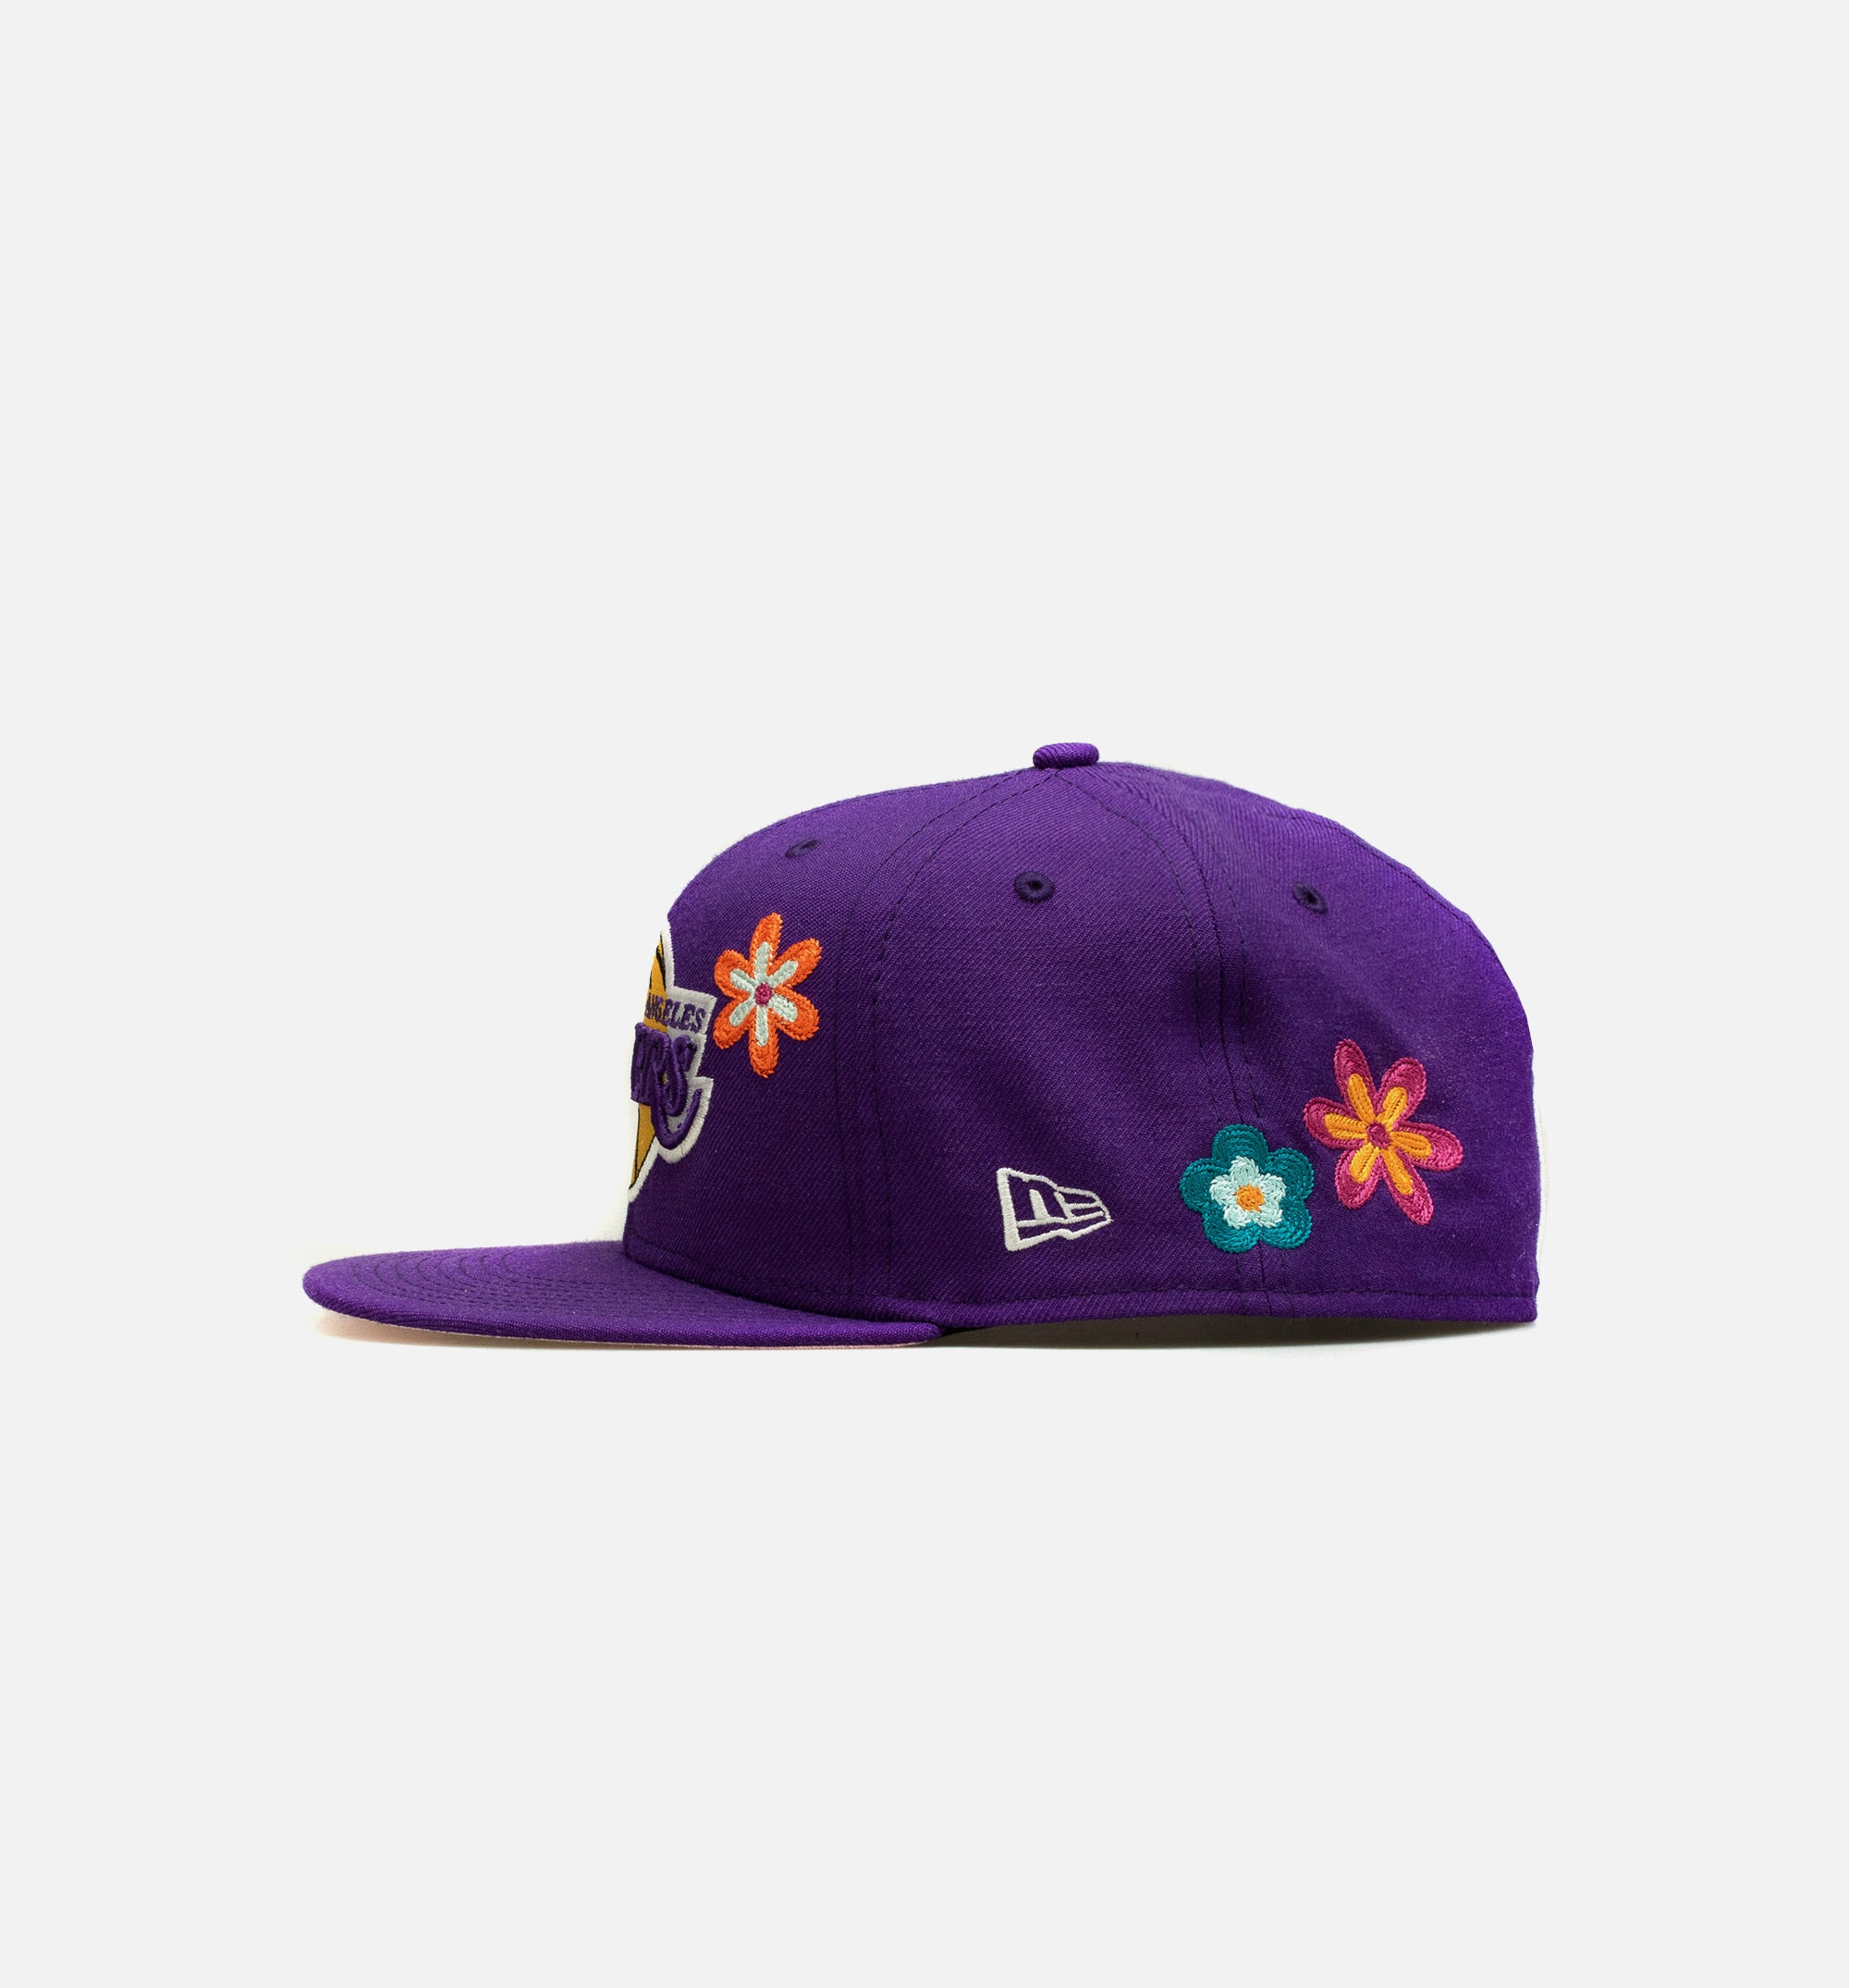 New Era Los Angeles Lakers Floral 59FIFTY Fitted Cap Mens Hat (Purple)